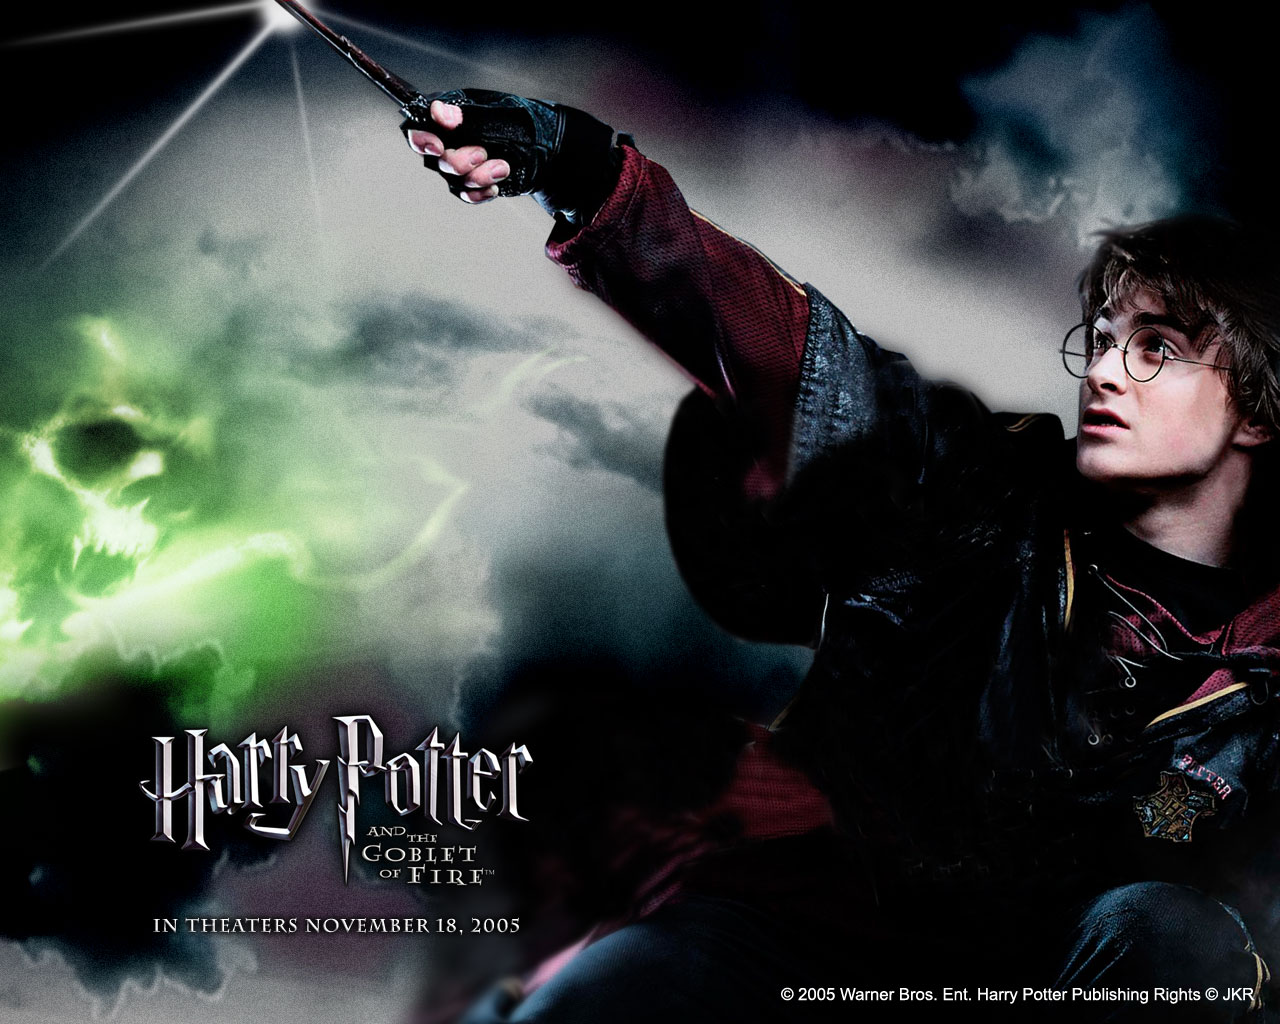 wallpaper do harry potter,movie,fictional character,poster,photography,cg artwork